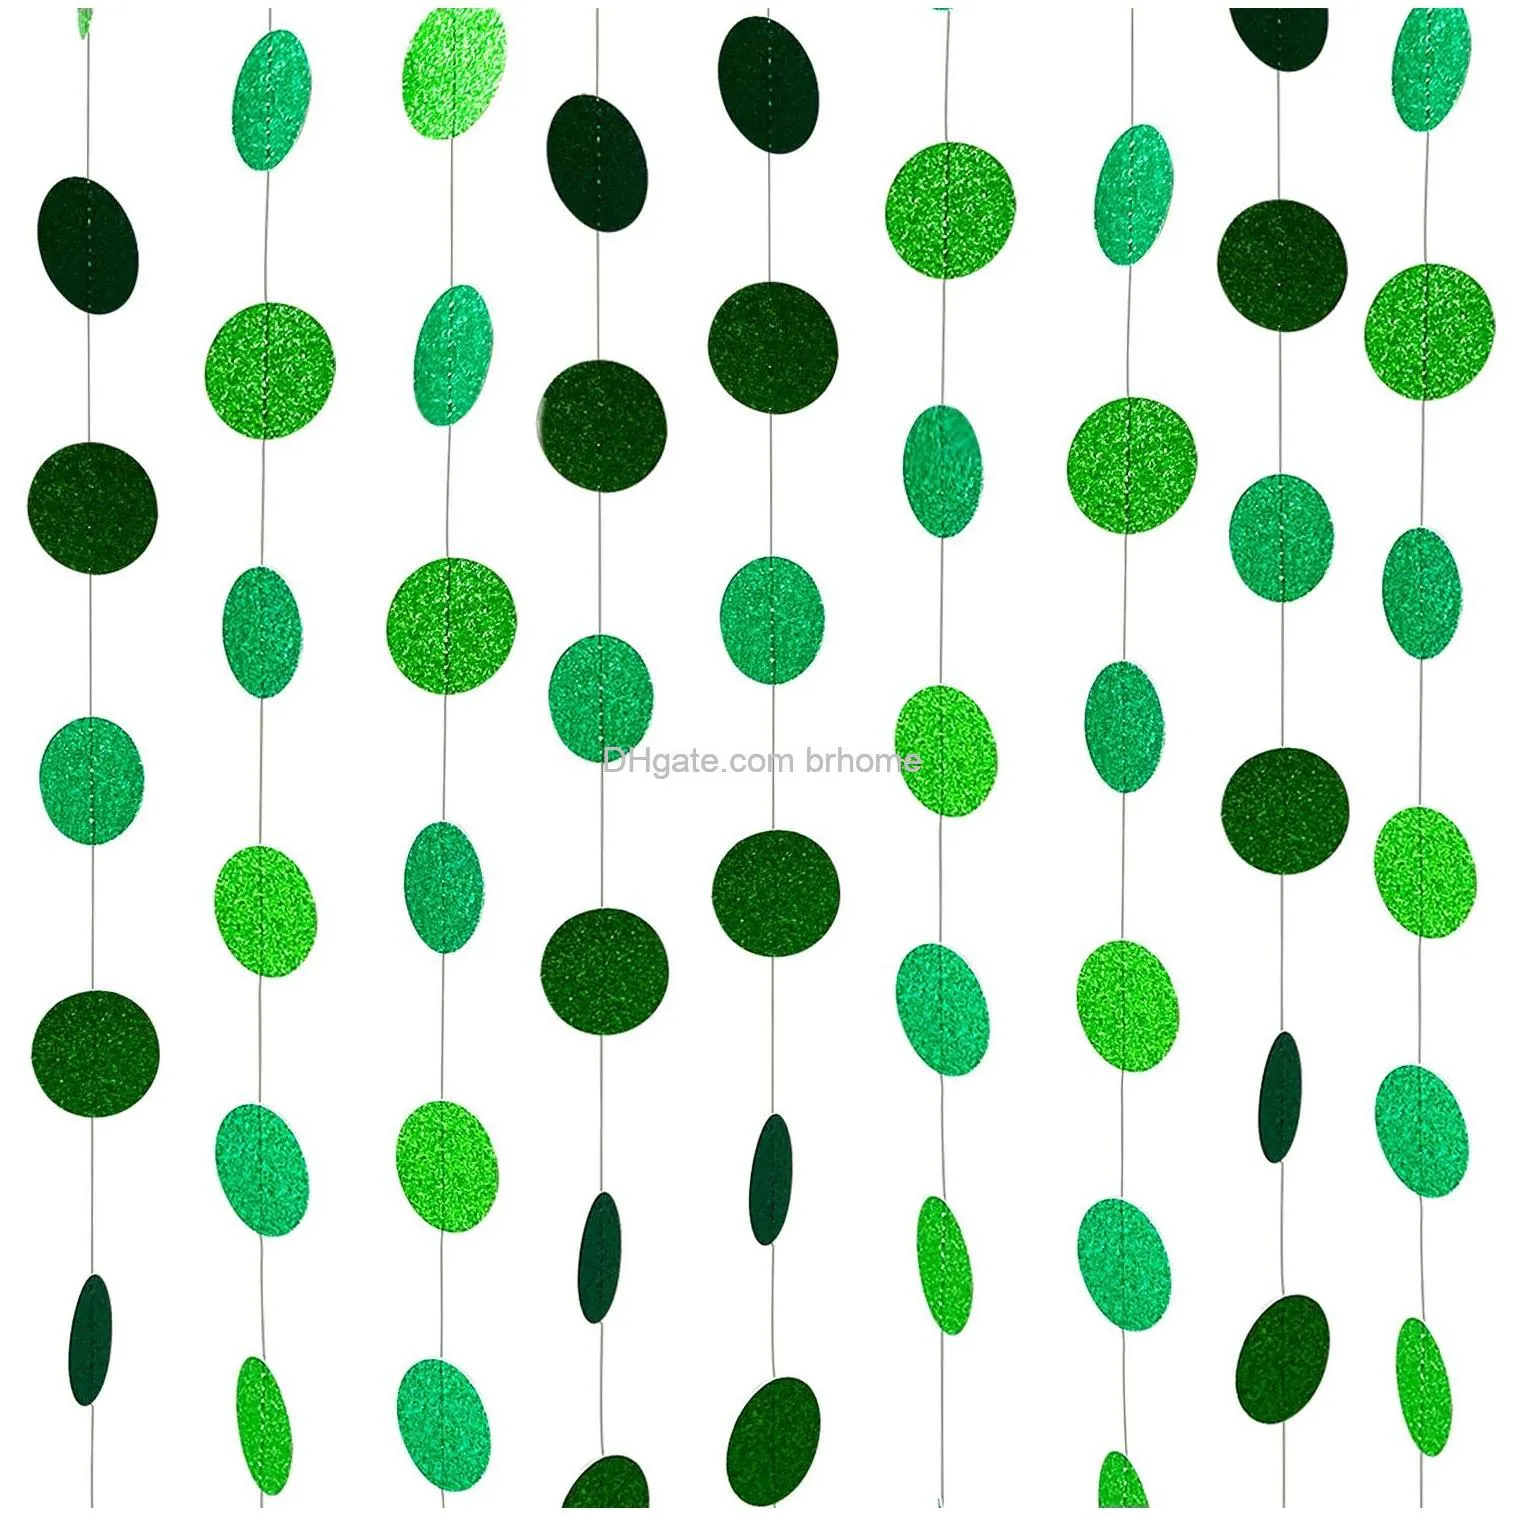 glitter green paper garland circle dot party banner hanging streamer backdrop decorations for green theme party st patricks day wedding birthday baby shower party supplies 40 feet